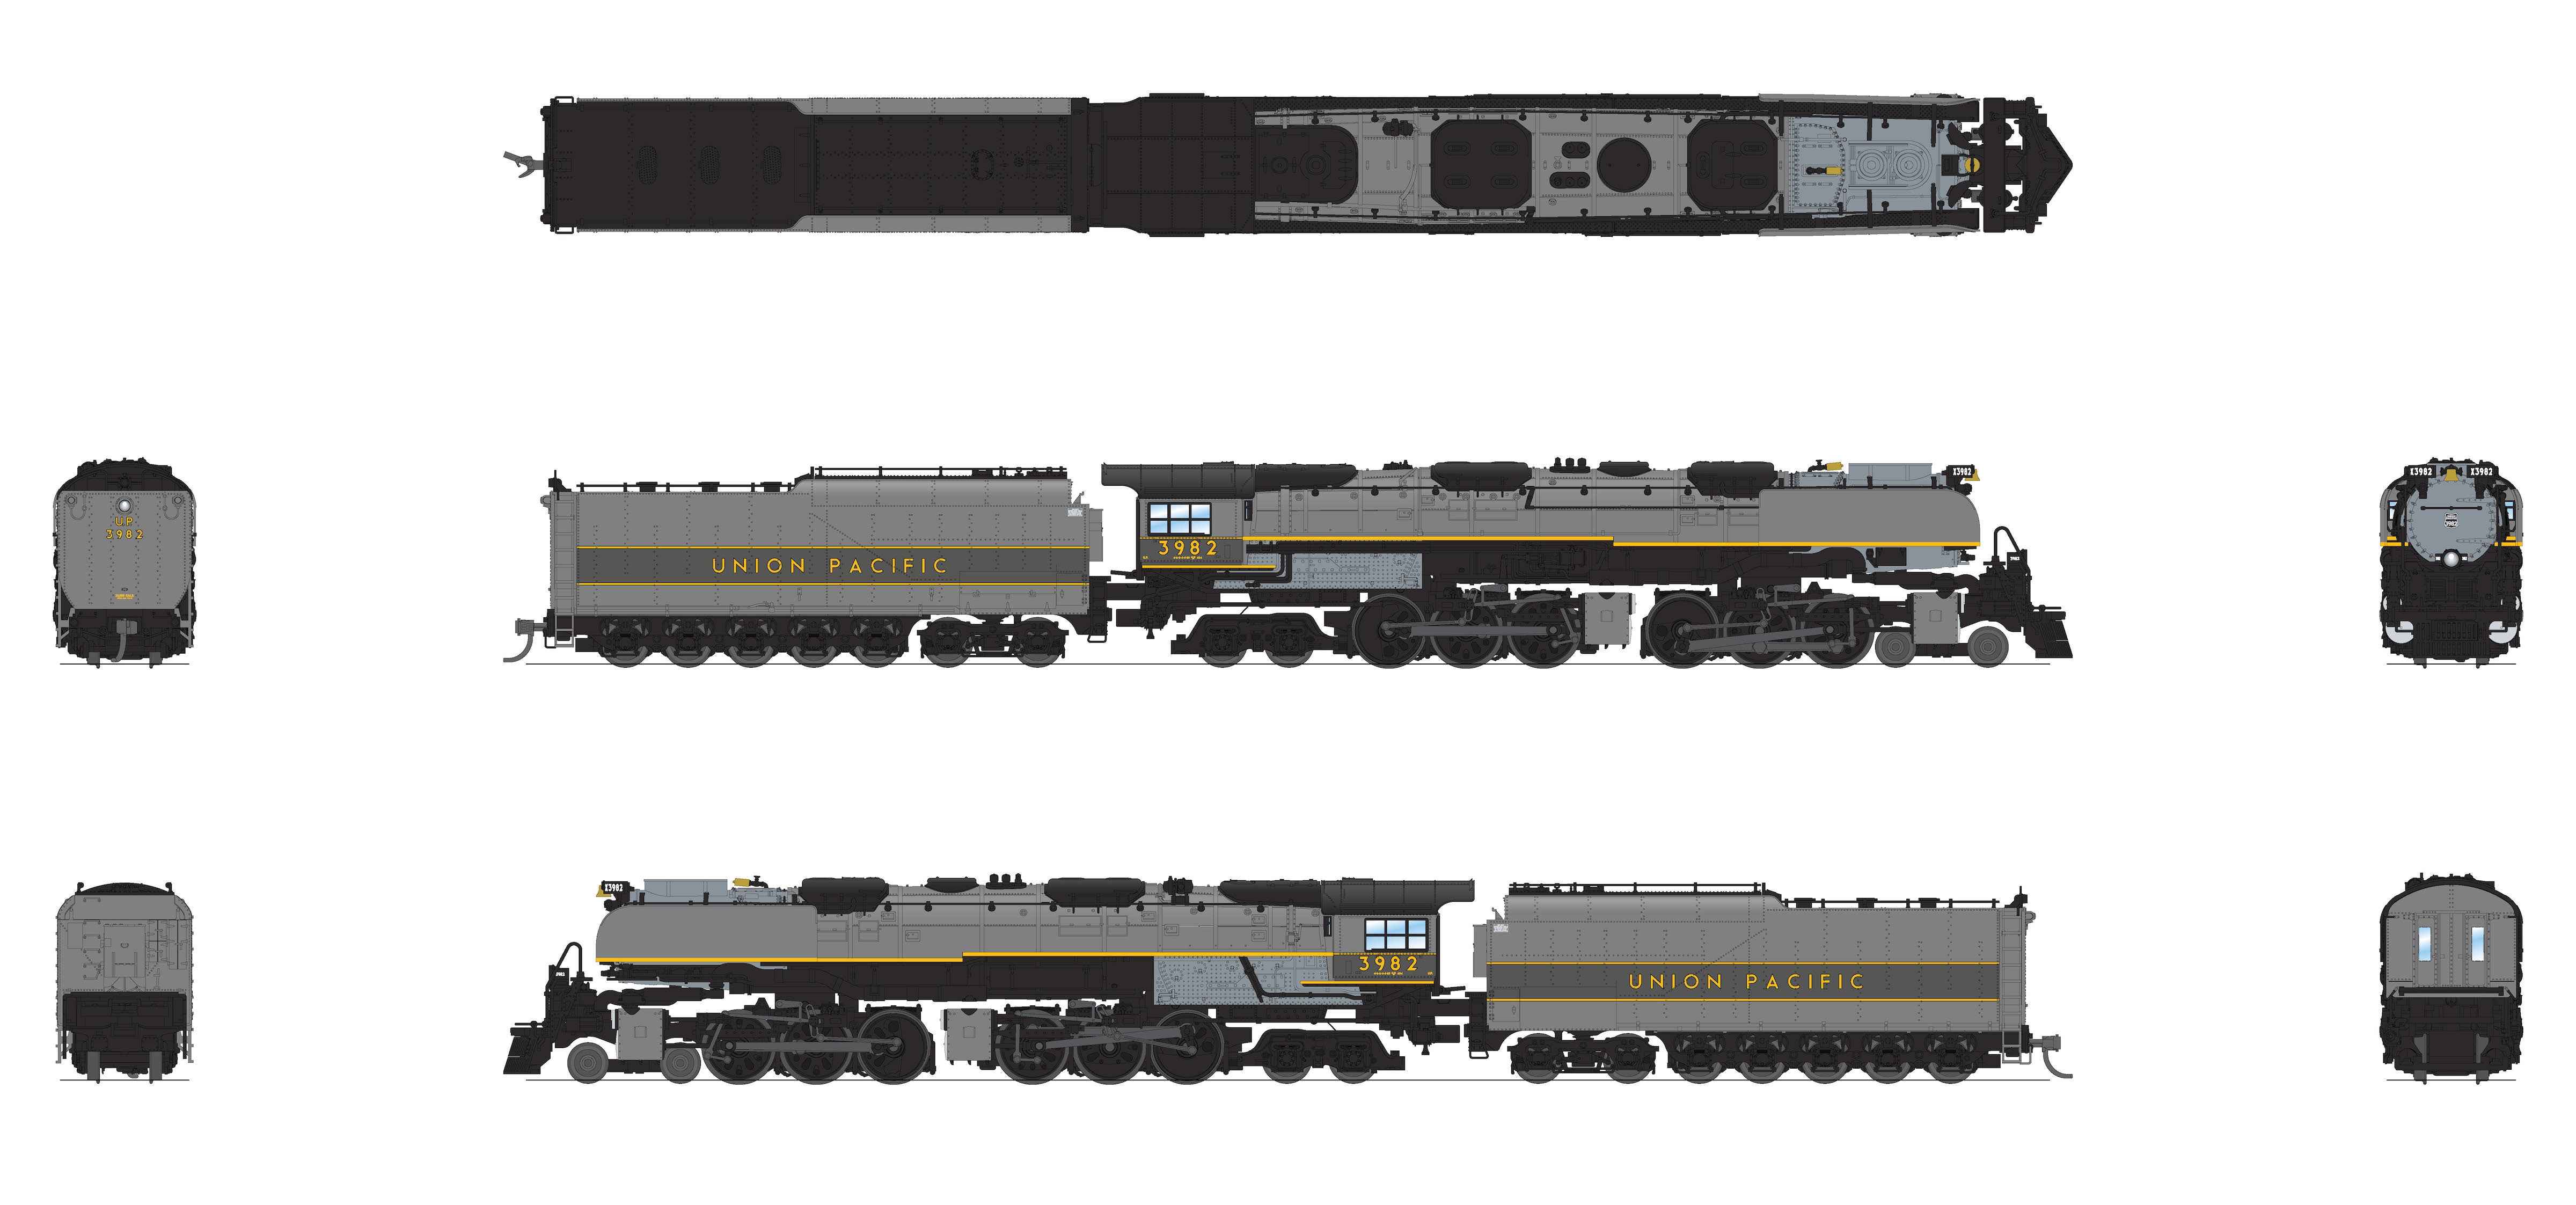 6984 UP Challenger 4-6-6-4, #3982, Two-tone Gray, Oil Tender, w/ wind wings, Paragon4 Sound/DC/DCC, Smoke, N